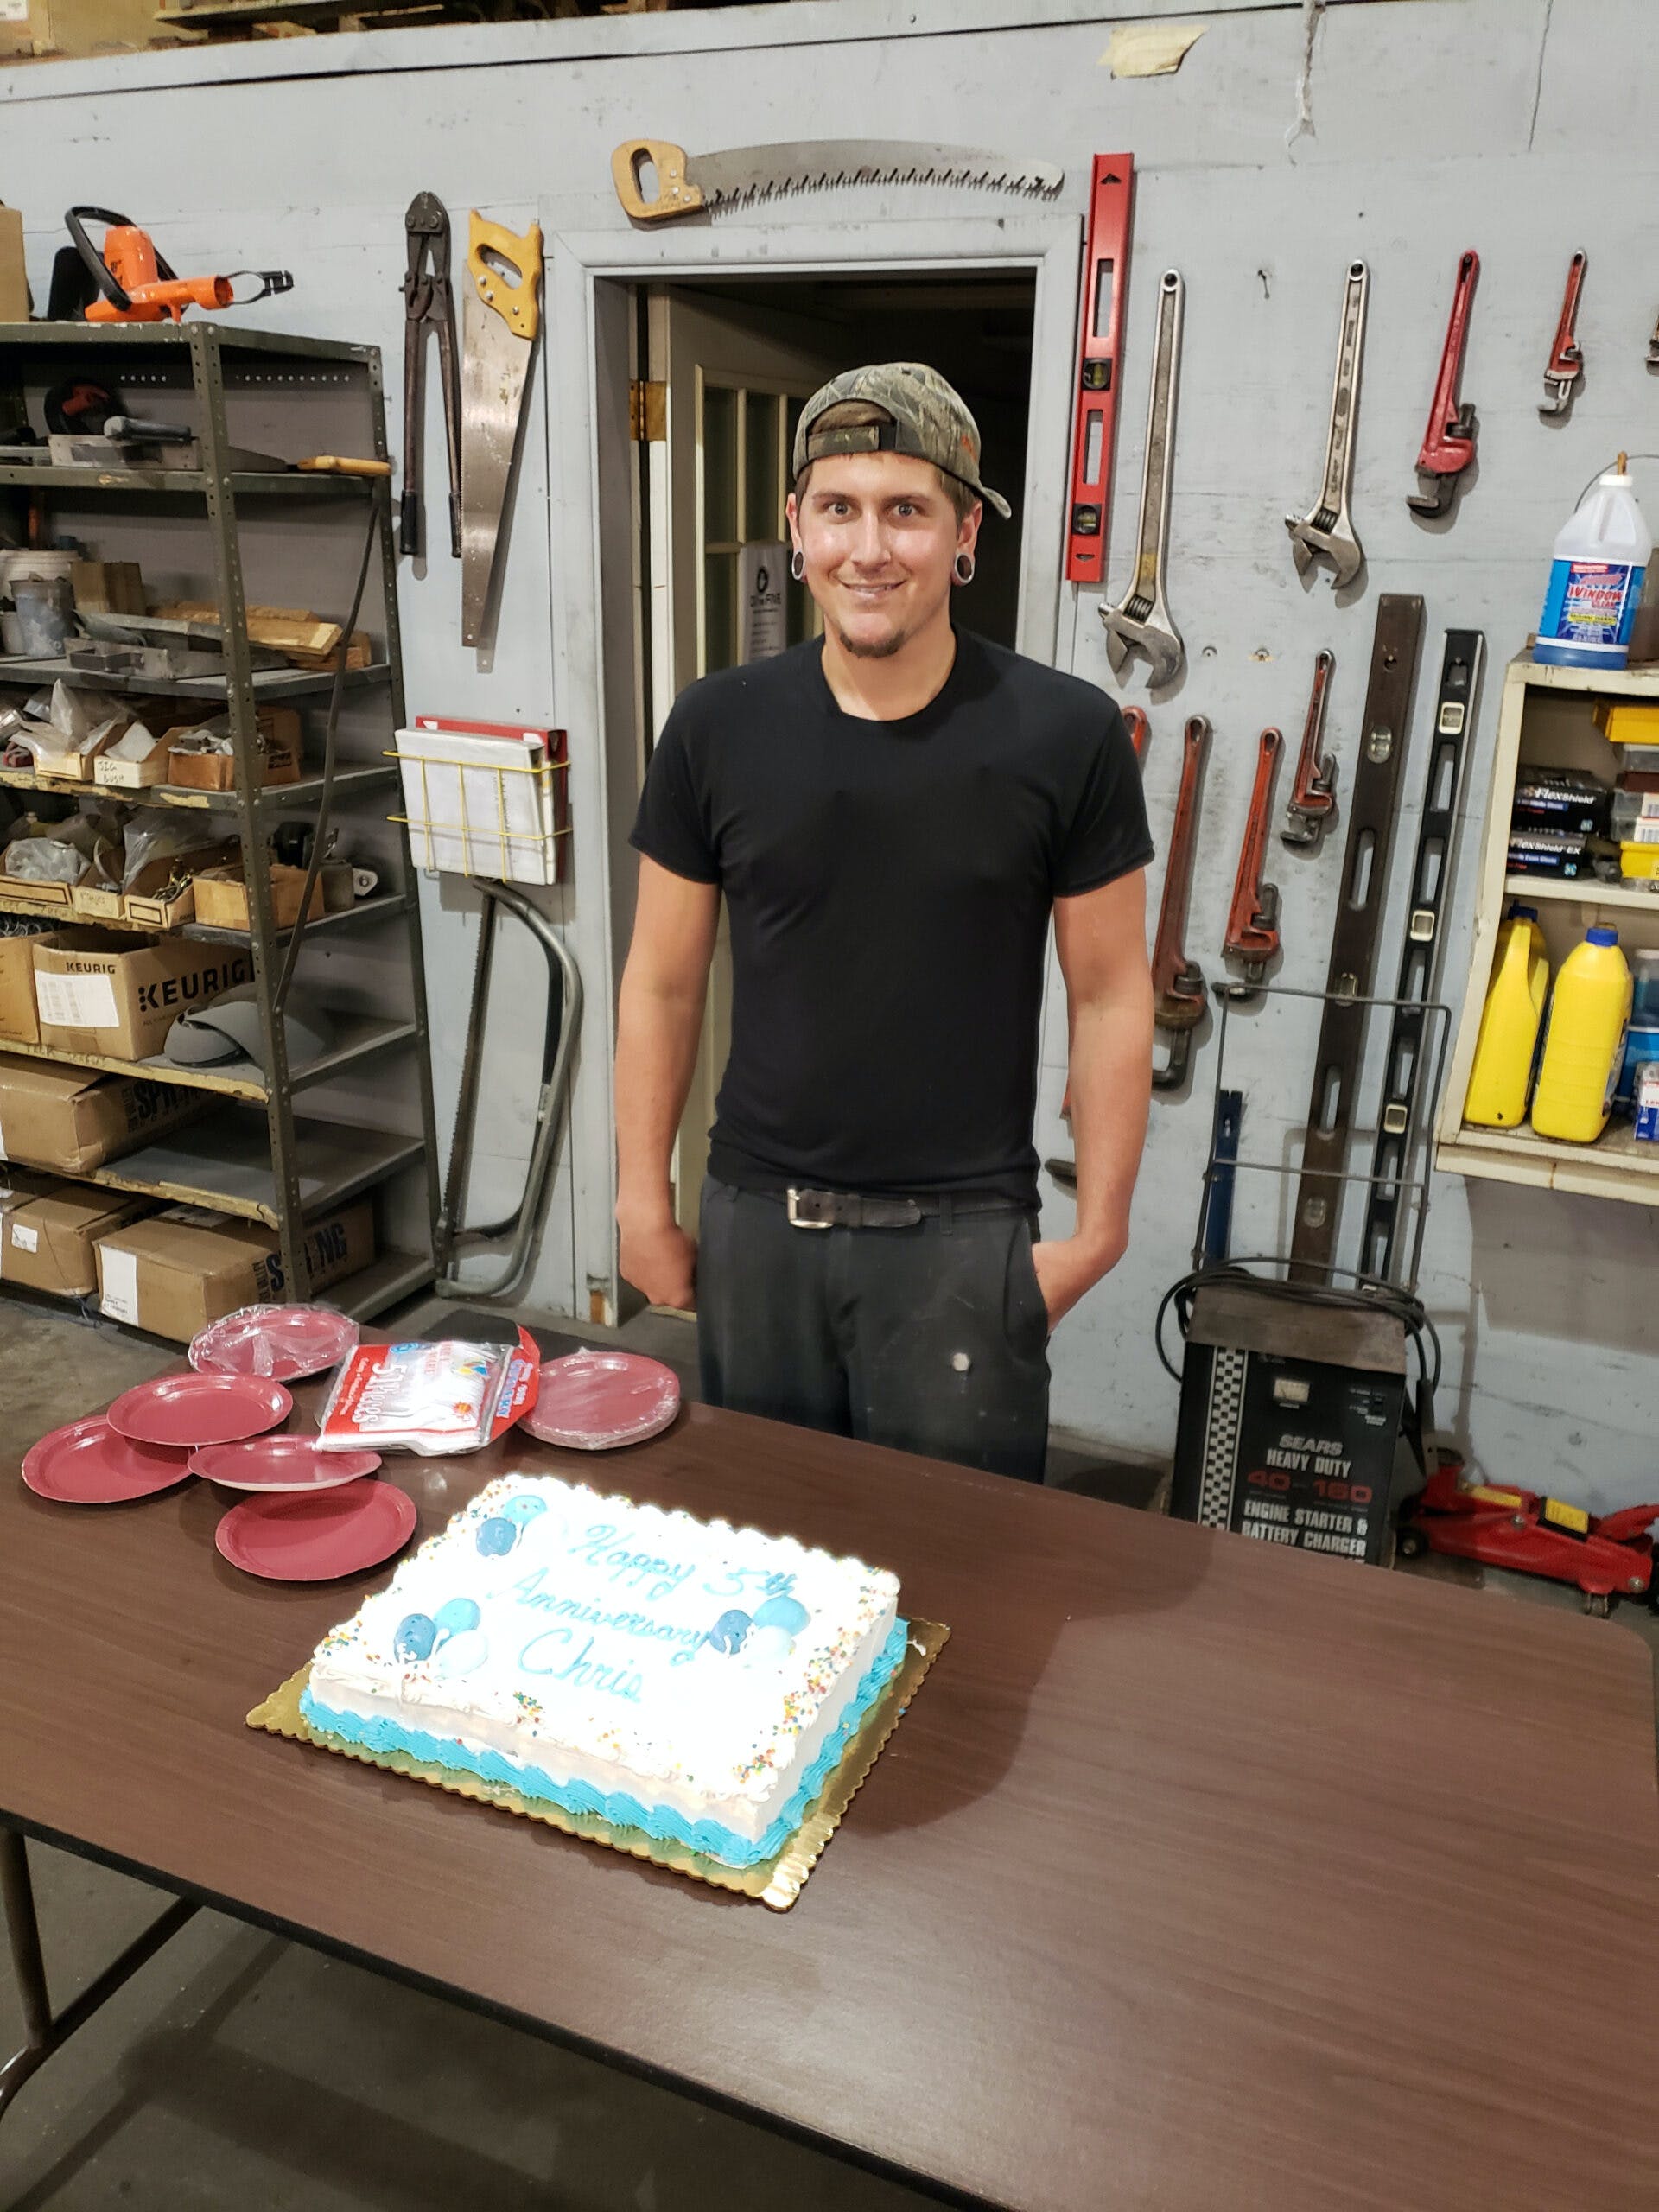 Welder Chris Longhi has been with us for 5 years